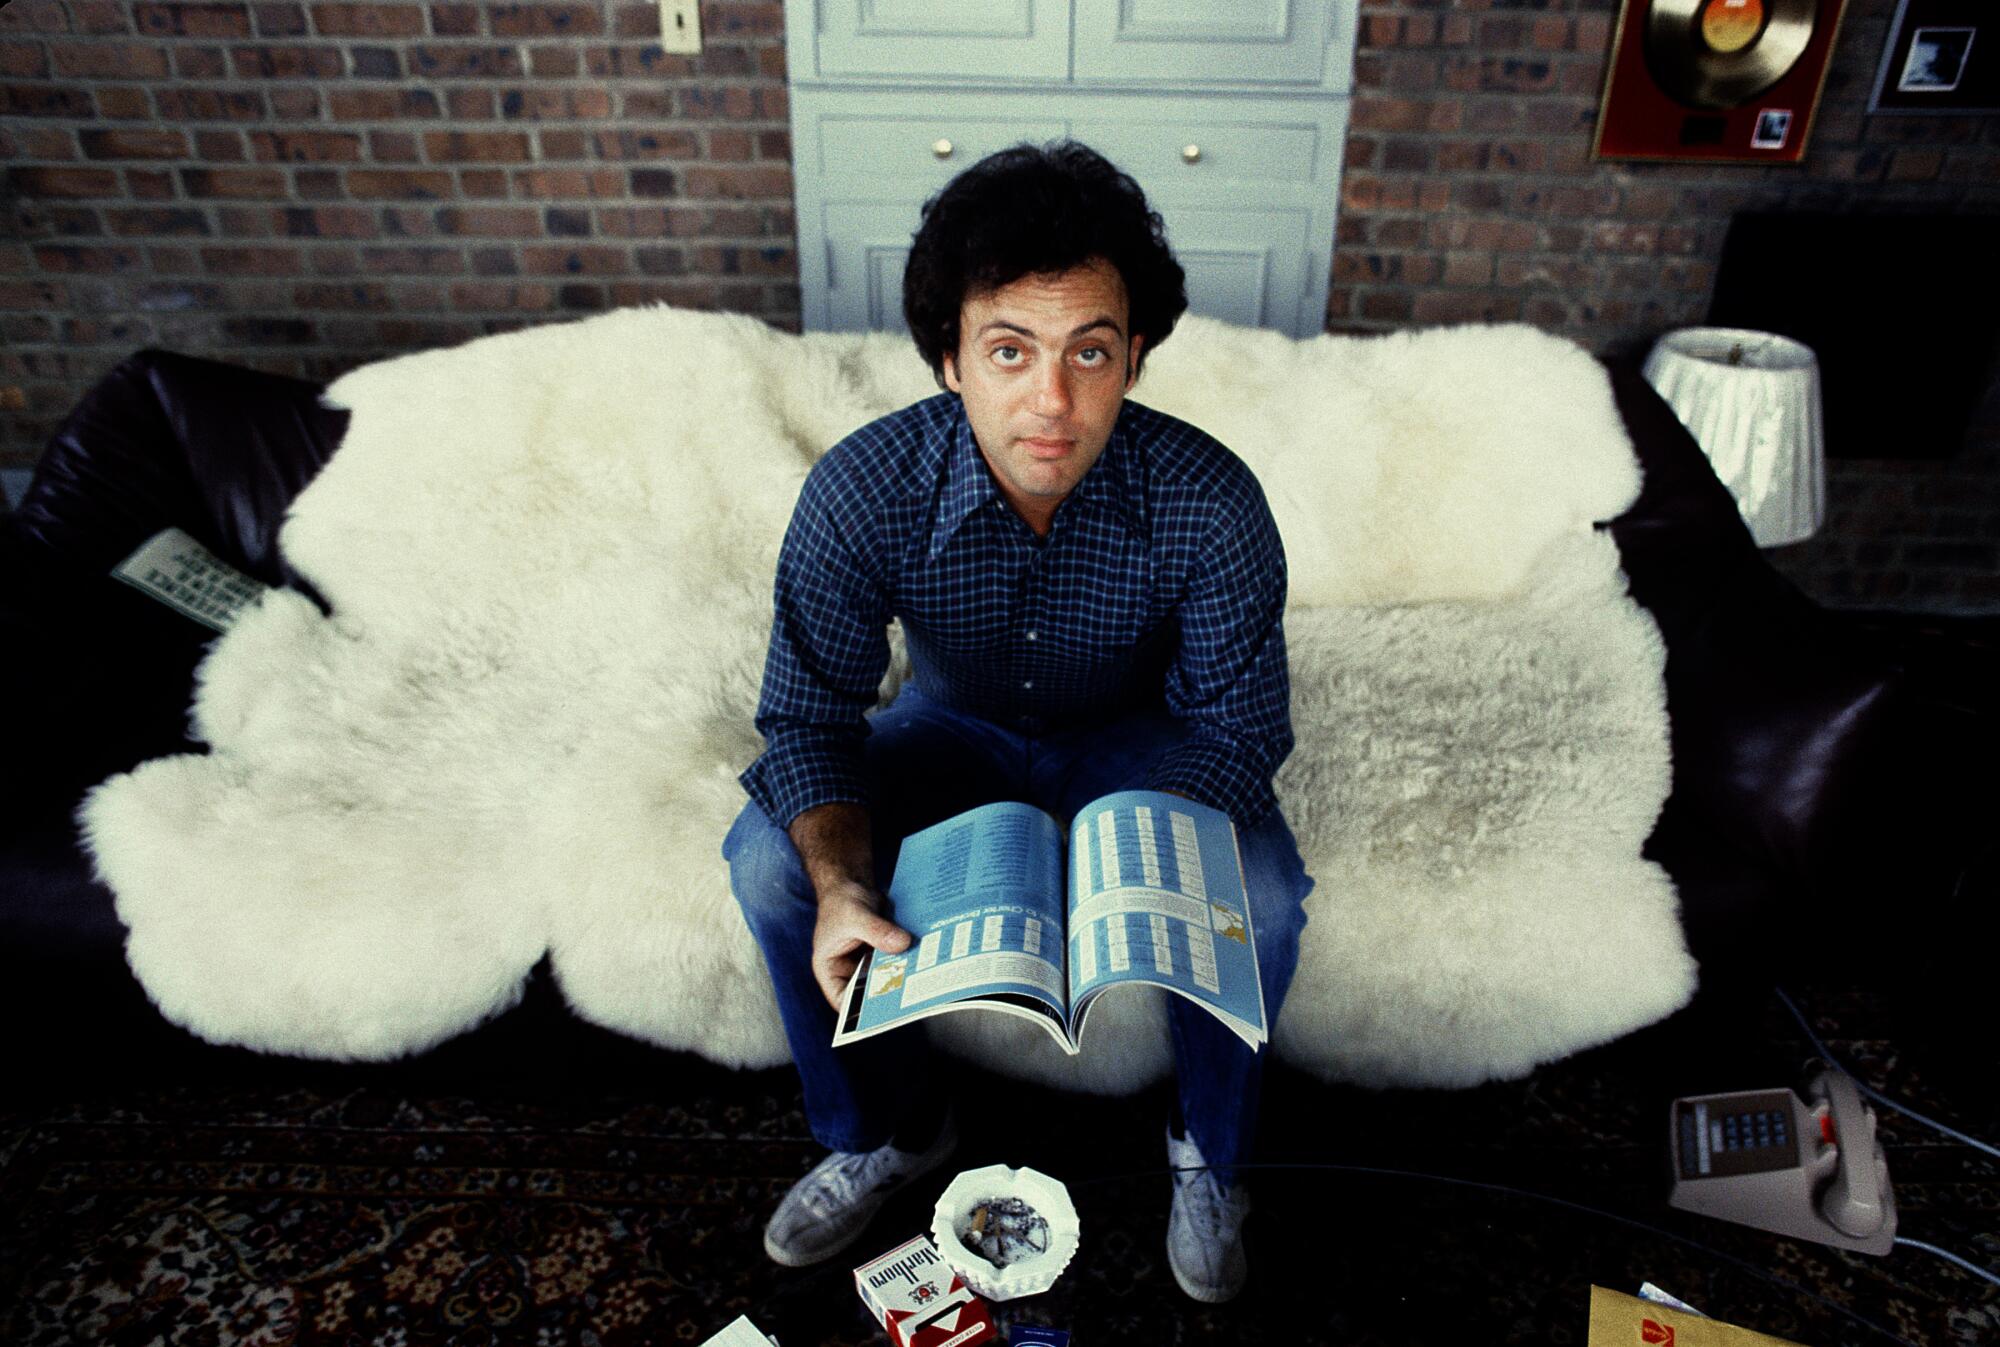 A young man sits on a sheepskin-covered sofa holding an open magazine